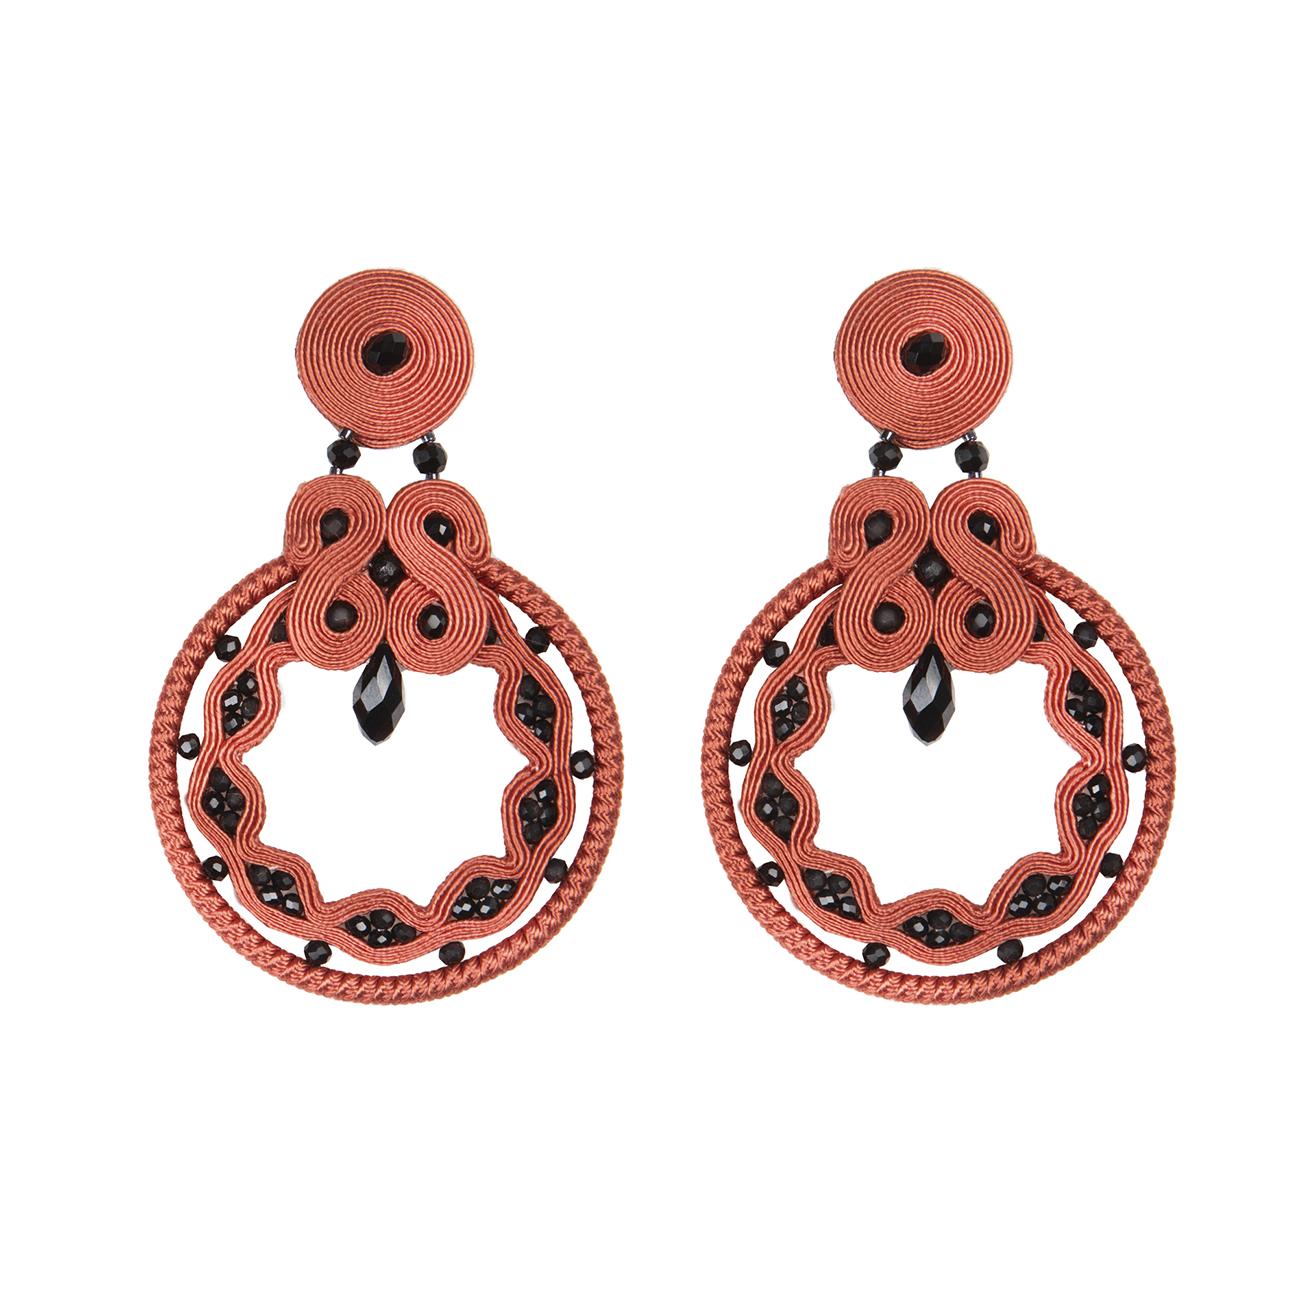 Musula Miabril Grana  Granate & Jet Soutache Earrings  Silver Closure
Soutache earrings made with silk rayon and crystal beads & silver closure
In nine beautiful colours each for different moment and dresses for the Feria 
 MiAbril @miabril is a